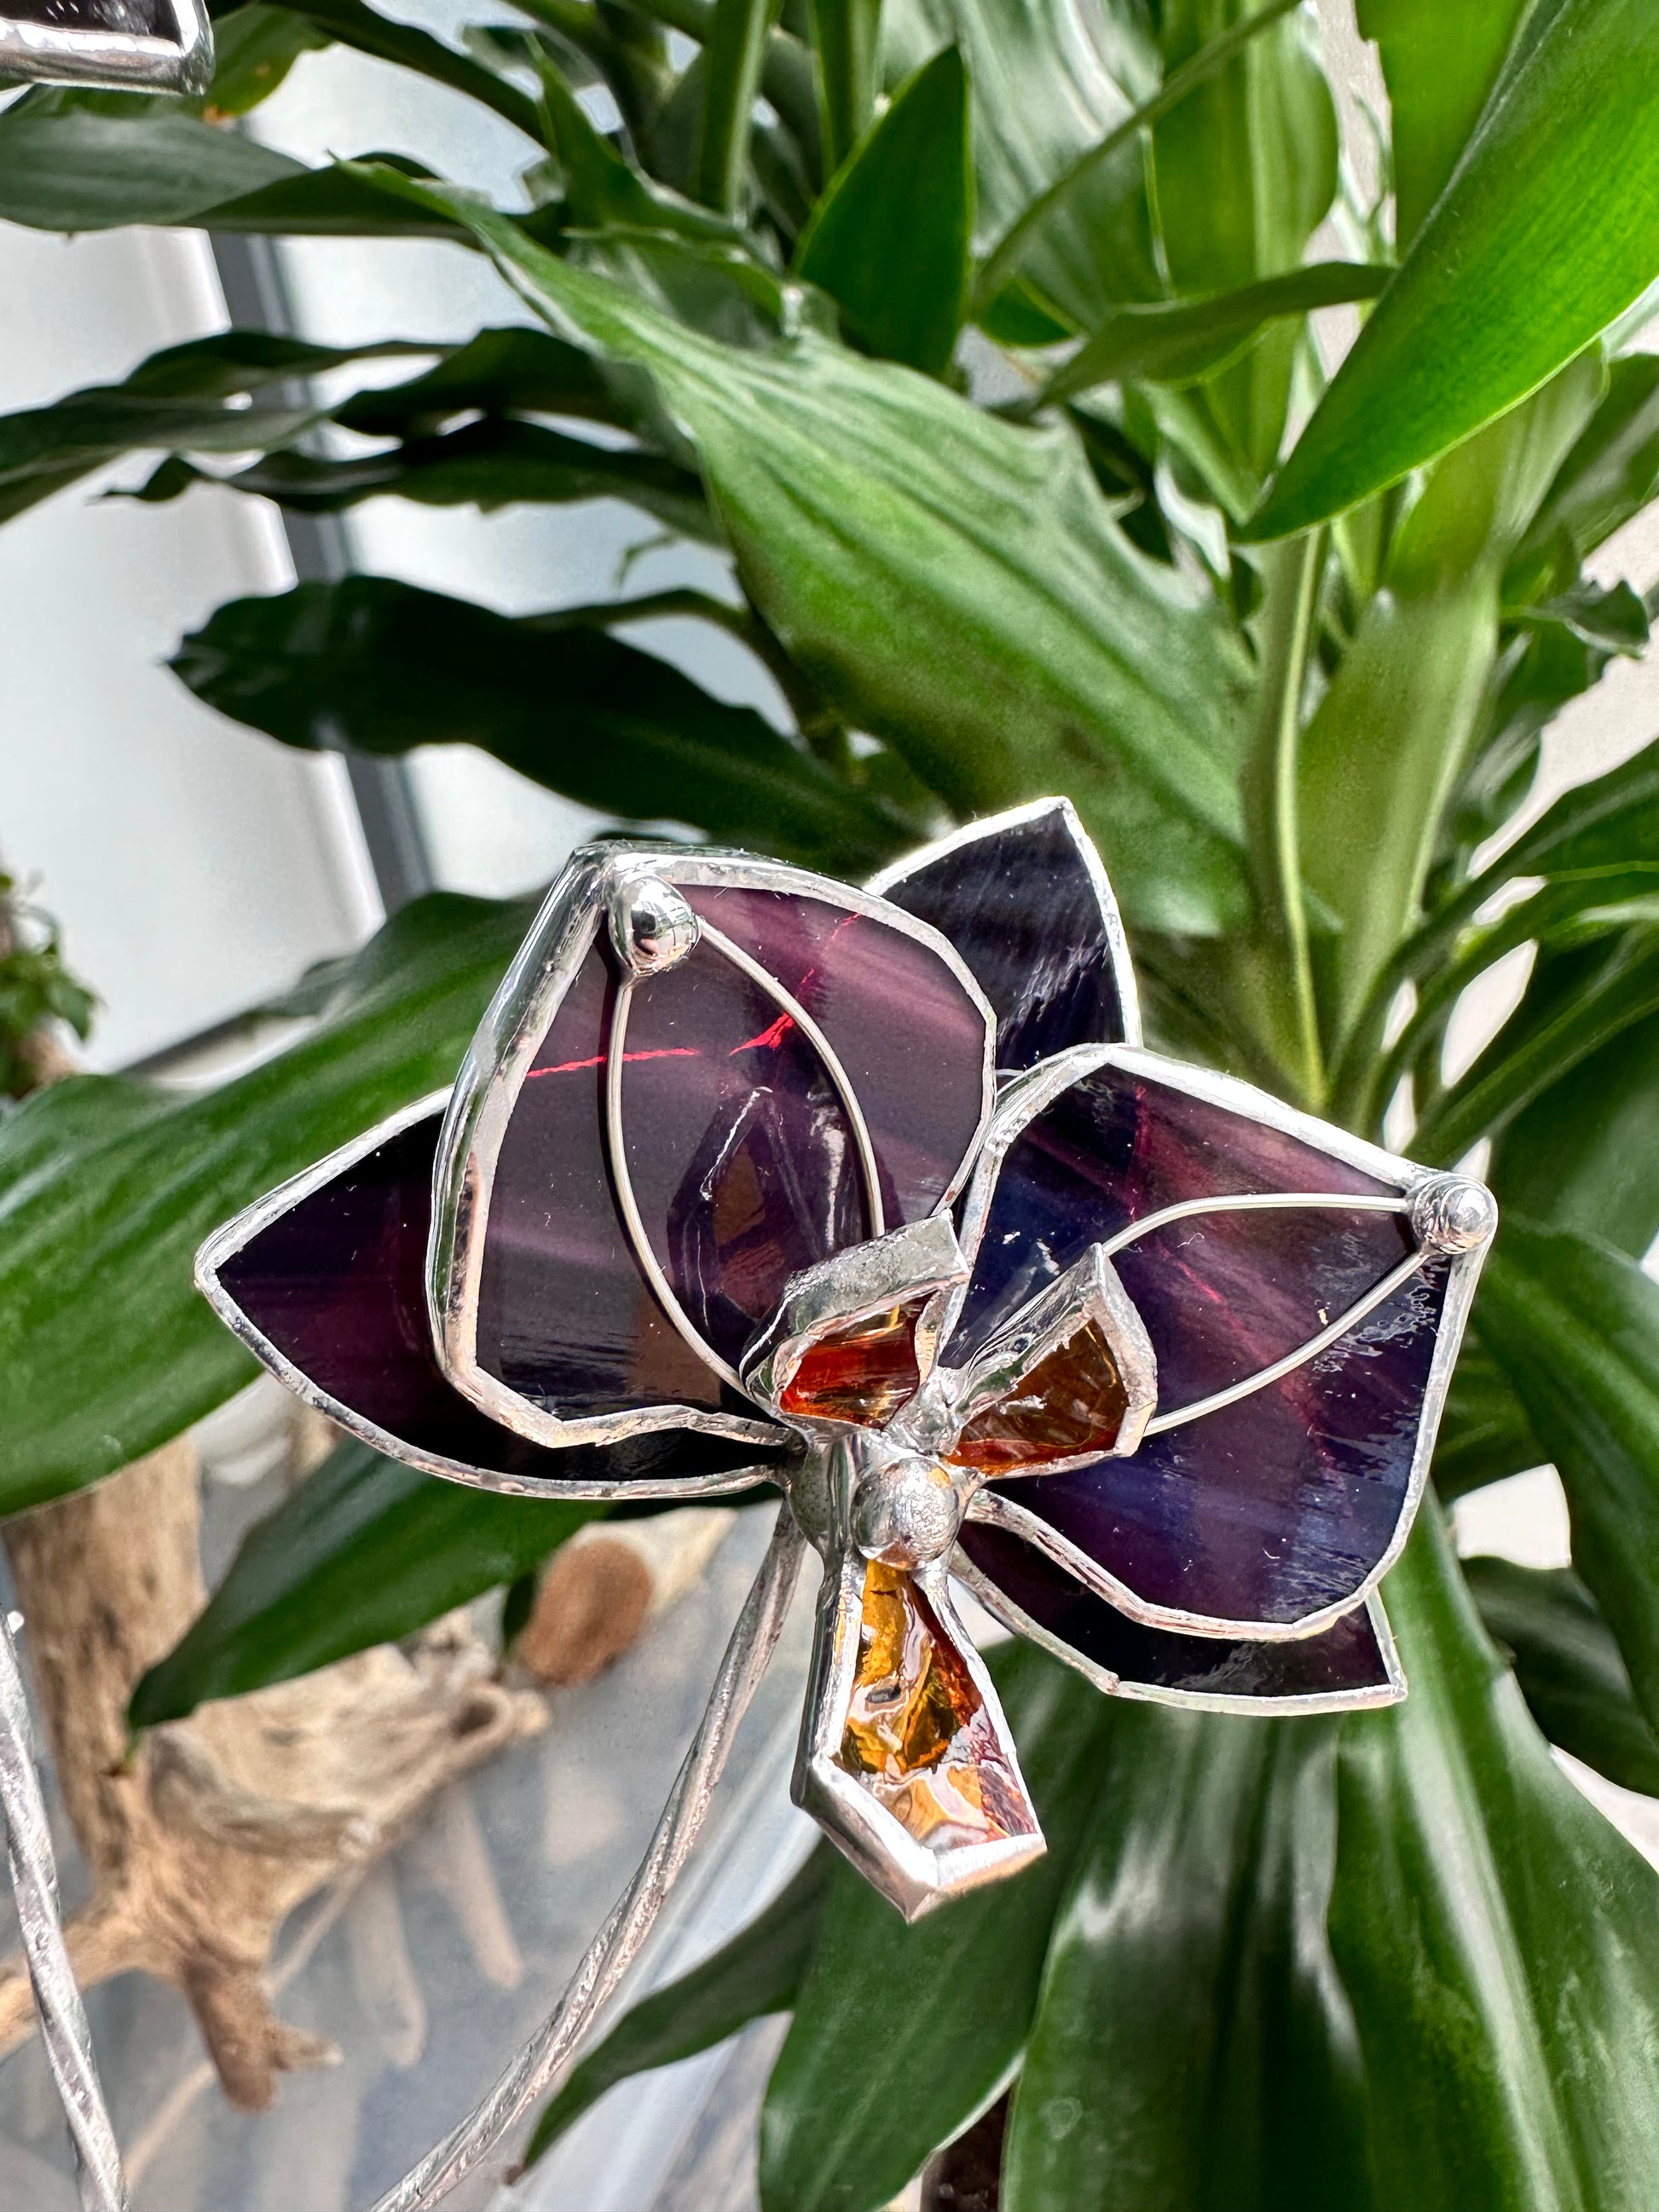 Ametyst Orchid Stained glass tropical flower 3D, Sun catcher